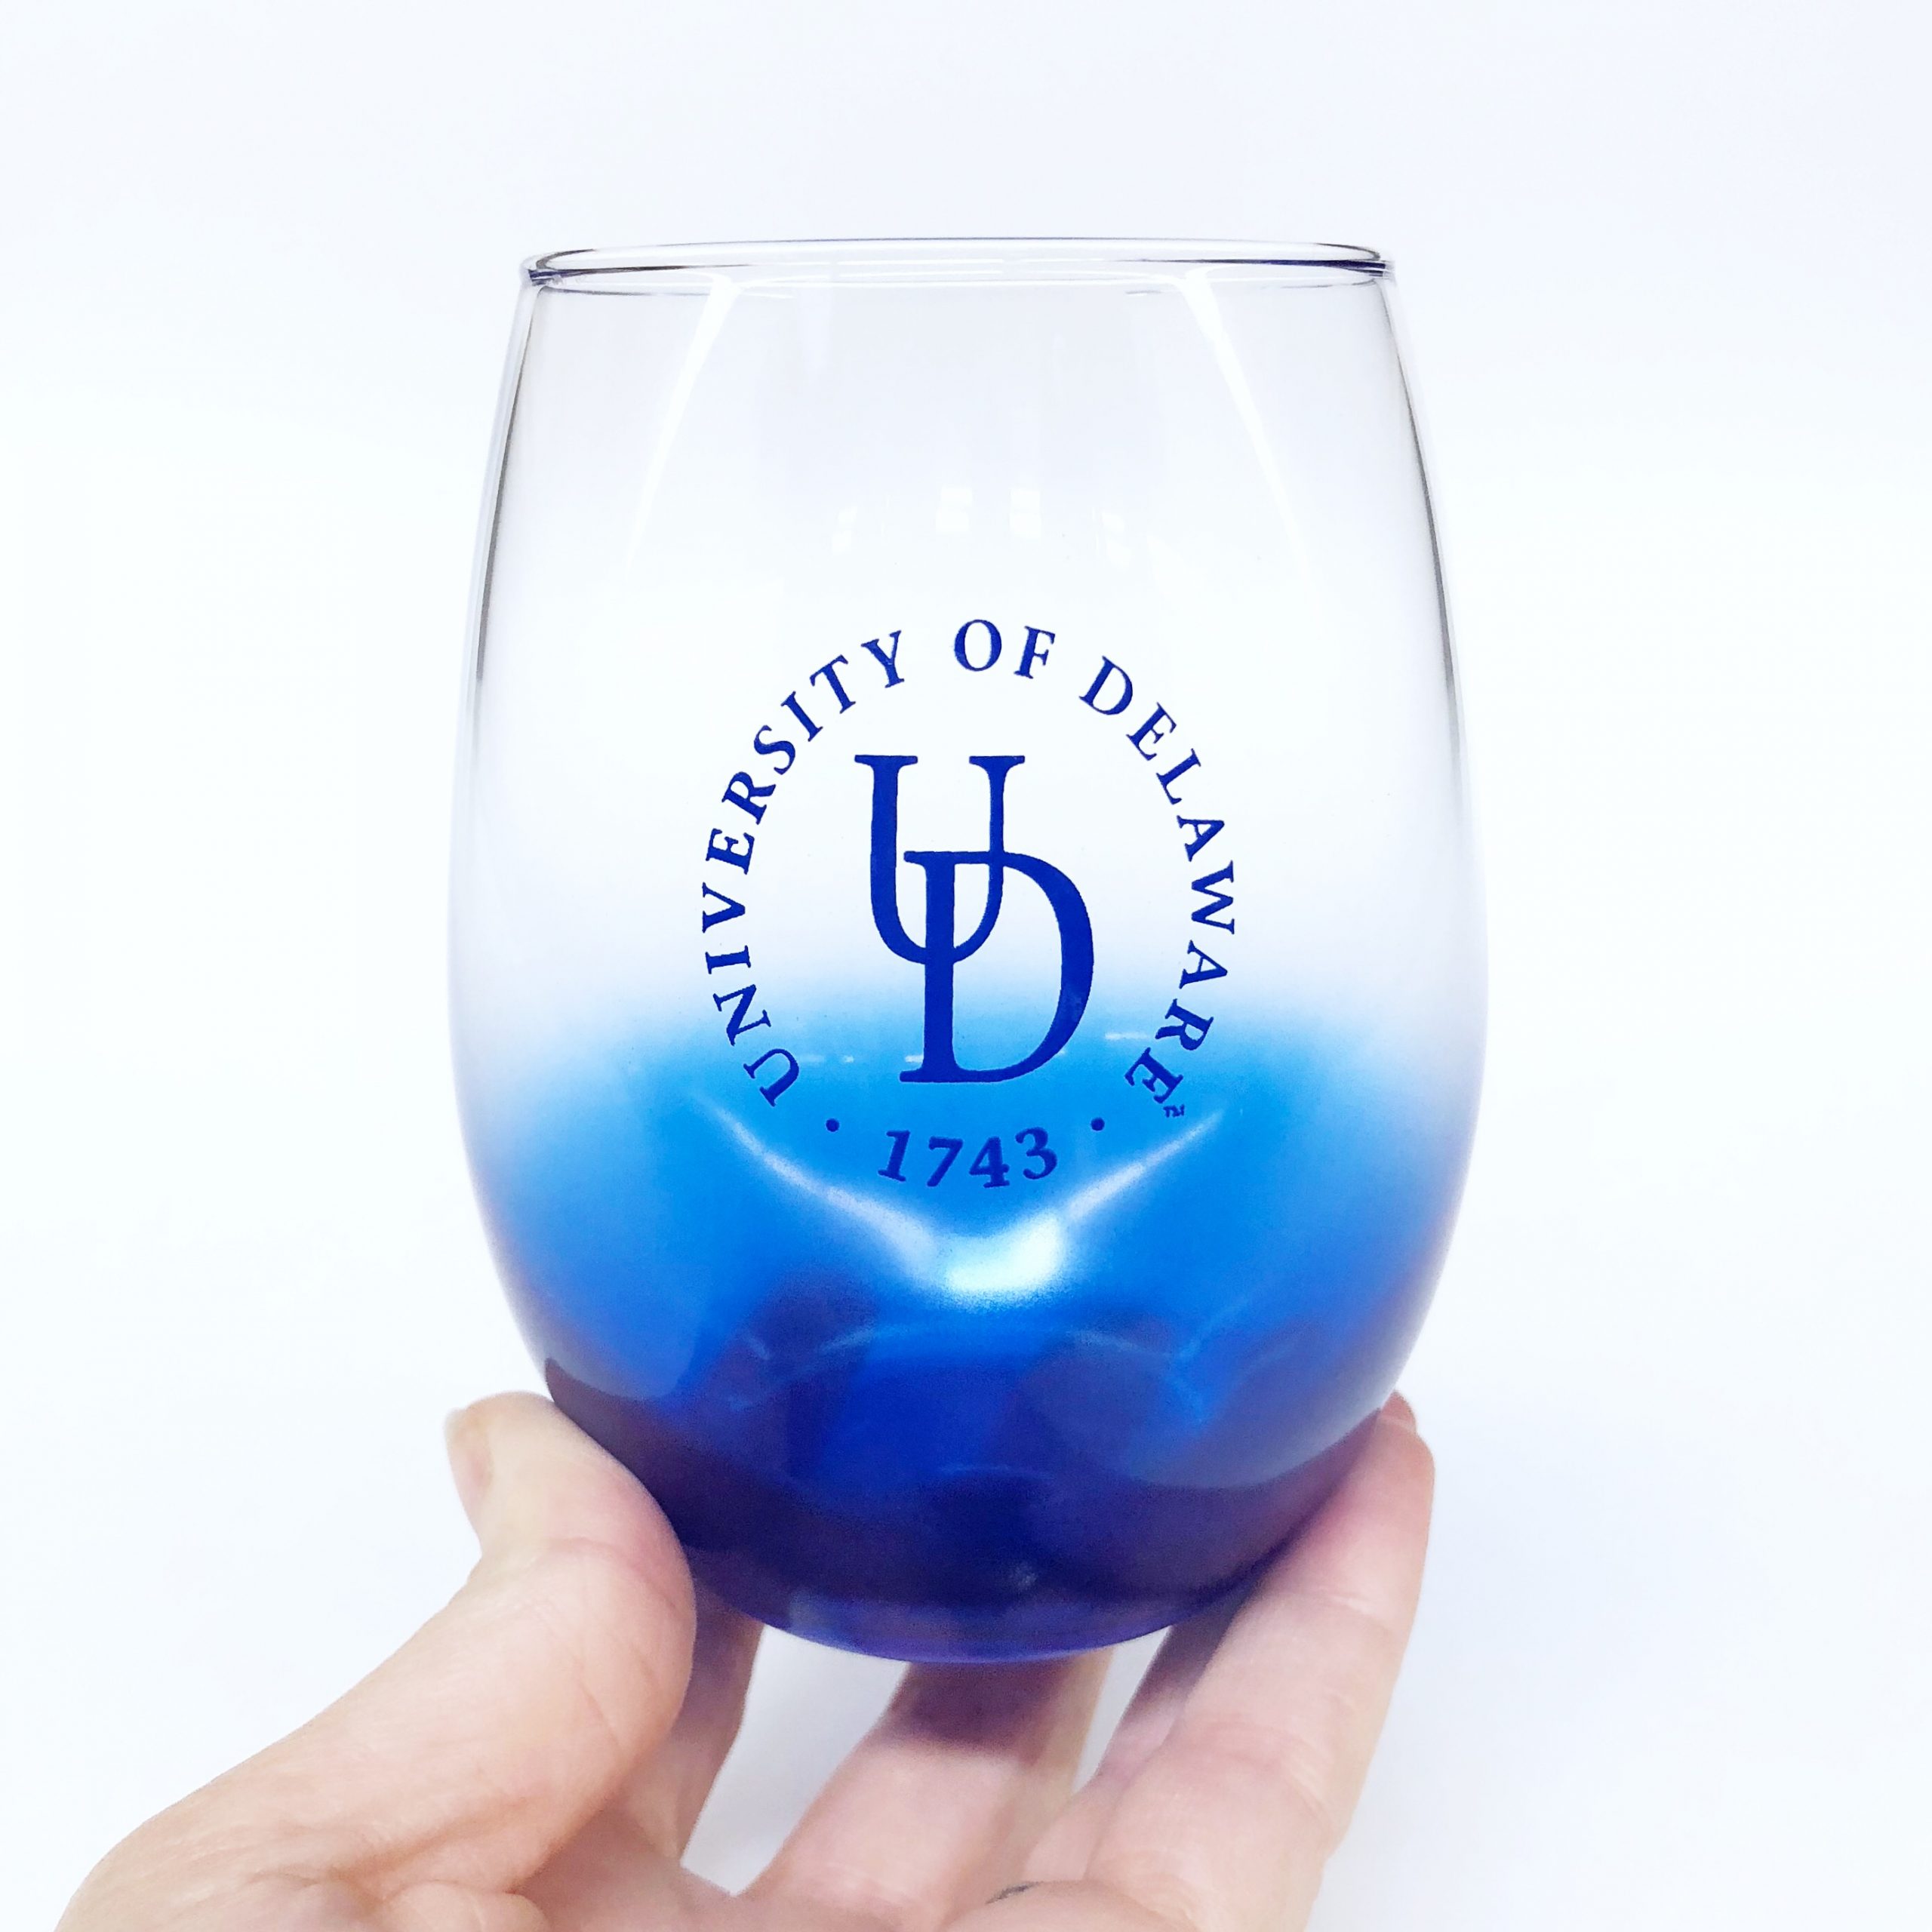 https://www.national5and10.com/wp-content/uploads/2018/10/University-of-Delaware-Blue-Ombre-Stemless-Wine-Glass-1-scaled.jpg